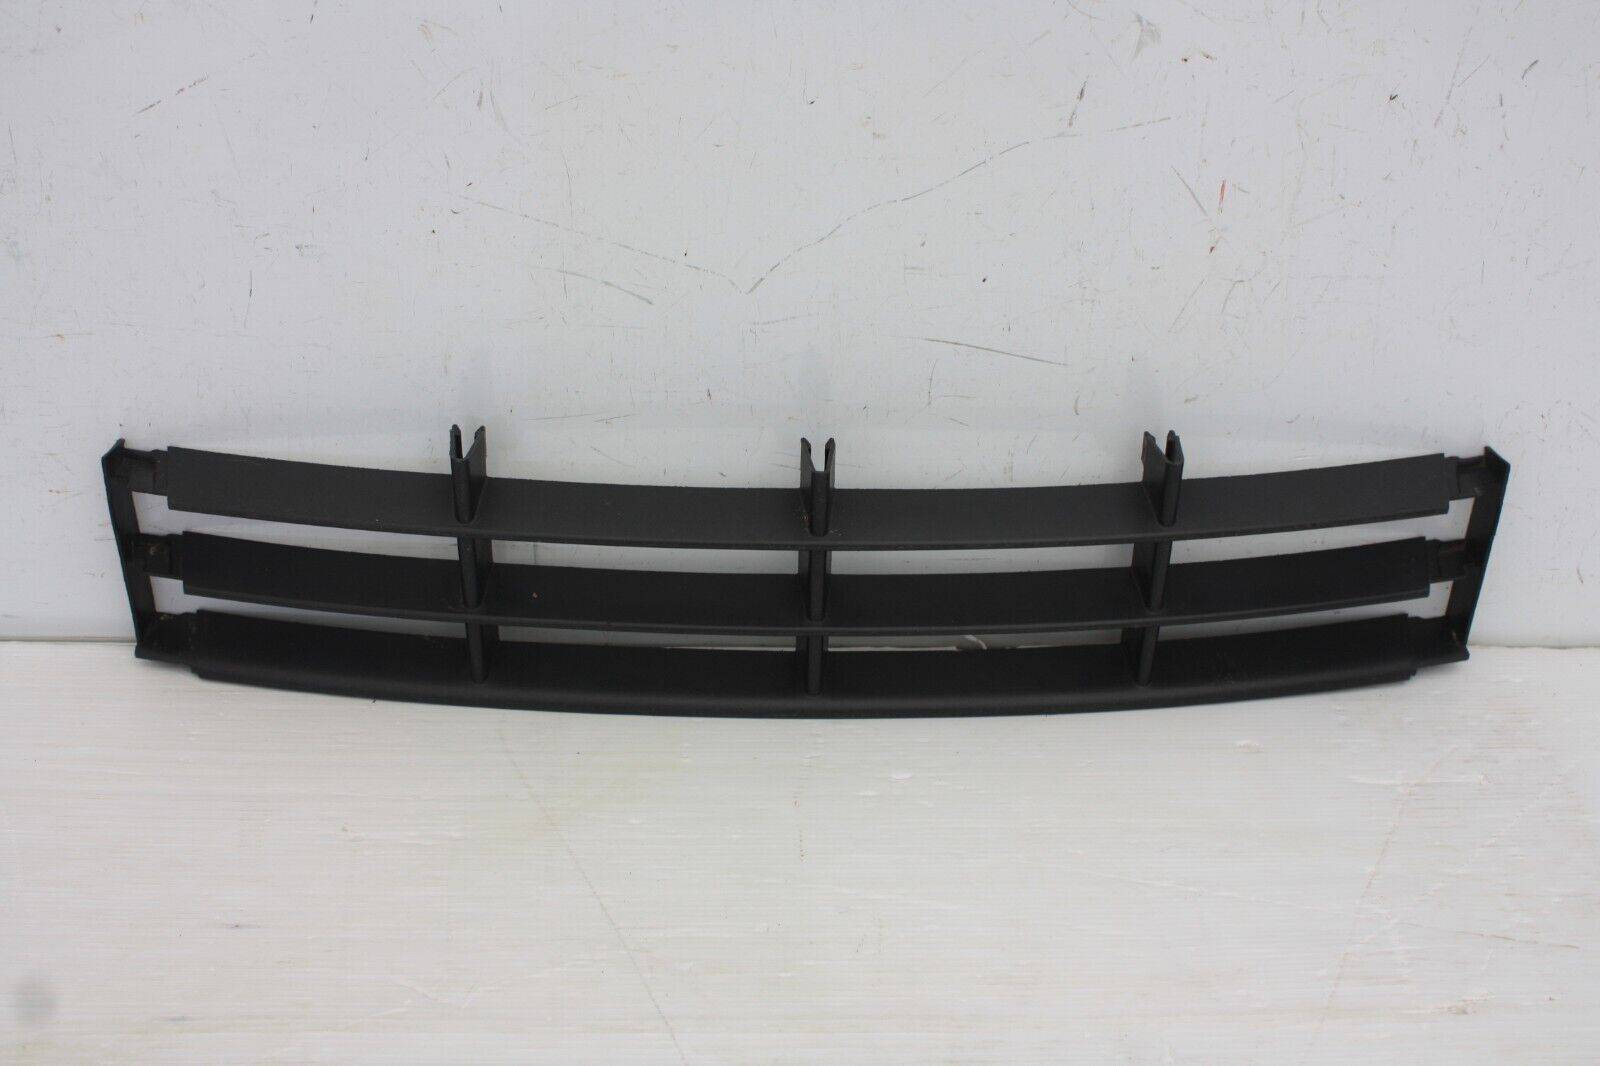 Skoda Fabia Roomster Front Bumper Grill 2010 TO 2014 5J0853677A Genuine 175404663513